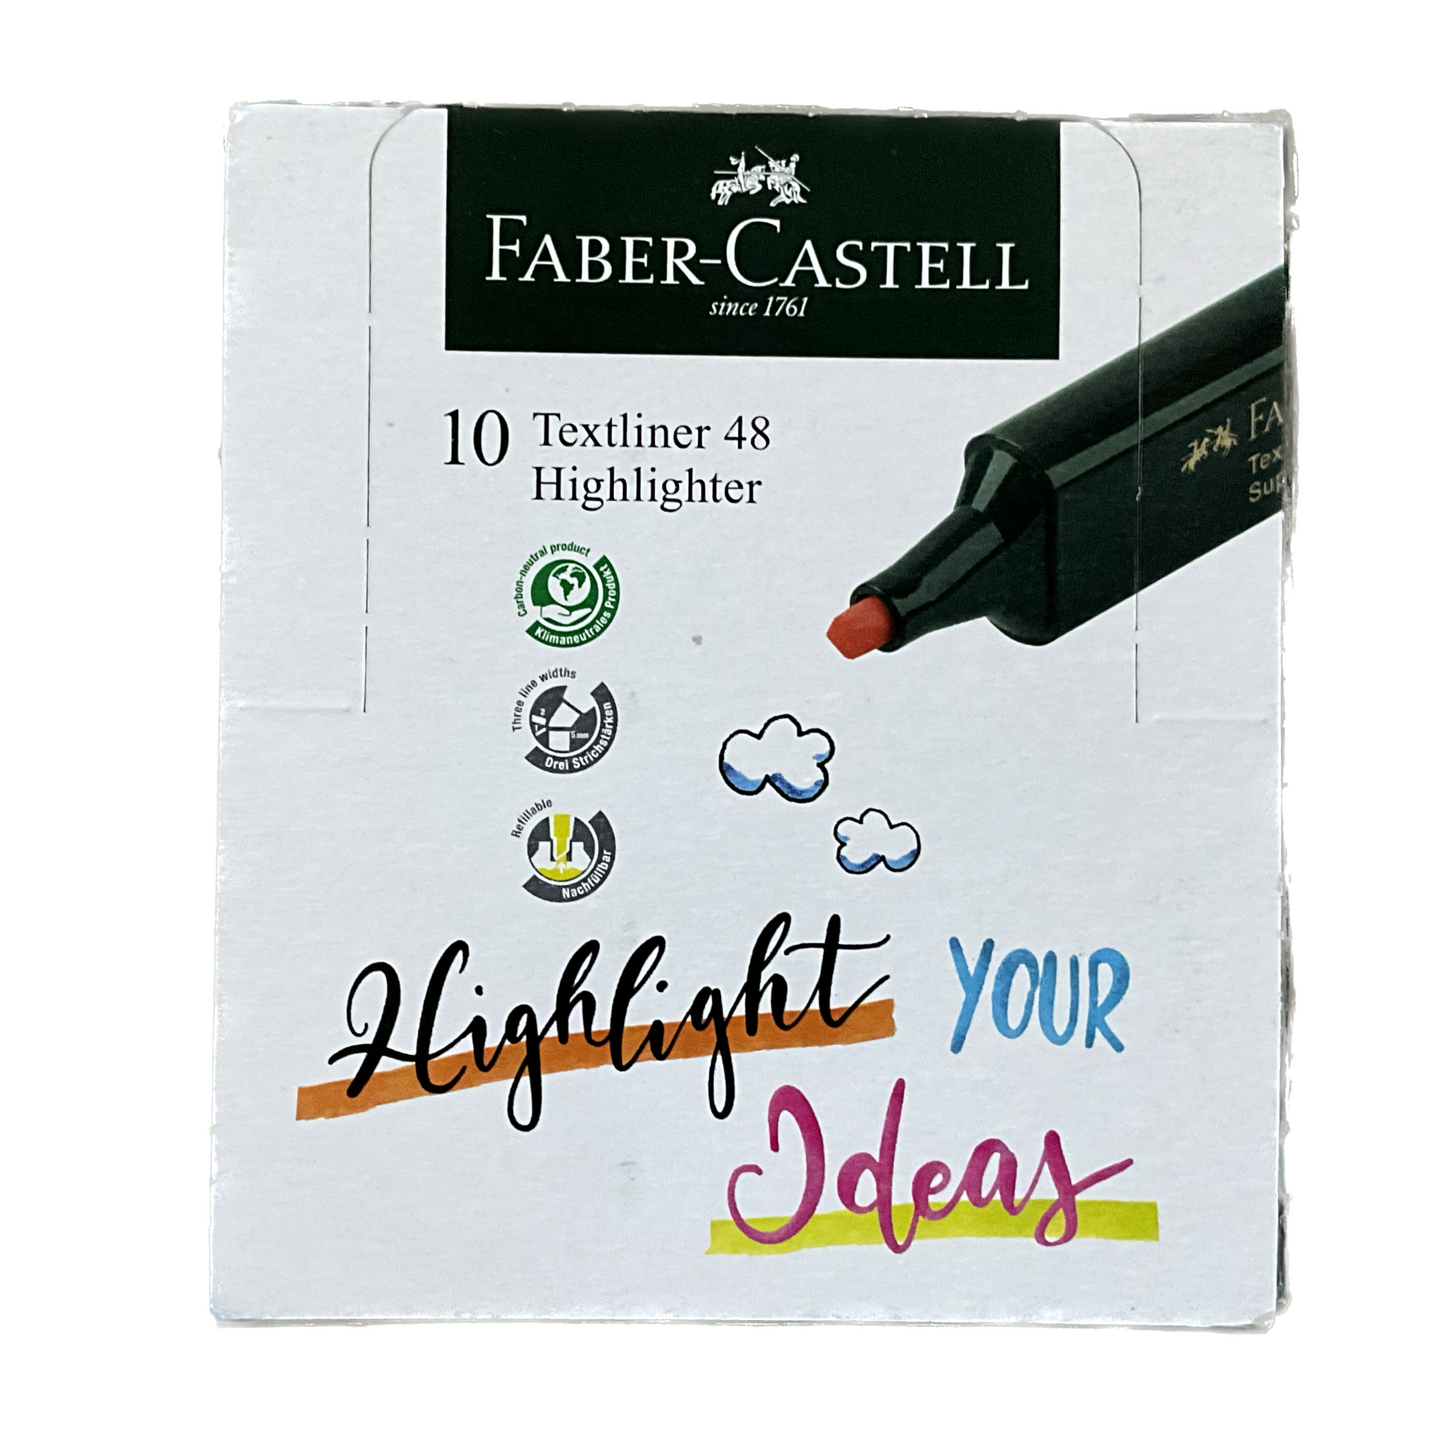 Faber-Castell Highlighter (Orange, Pink, Green, Yellow, or Blue)